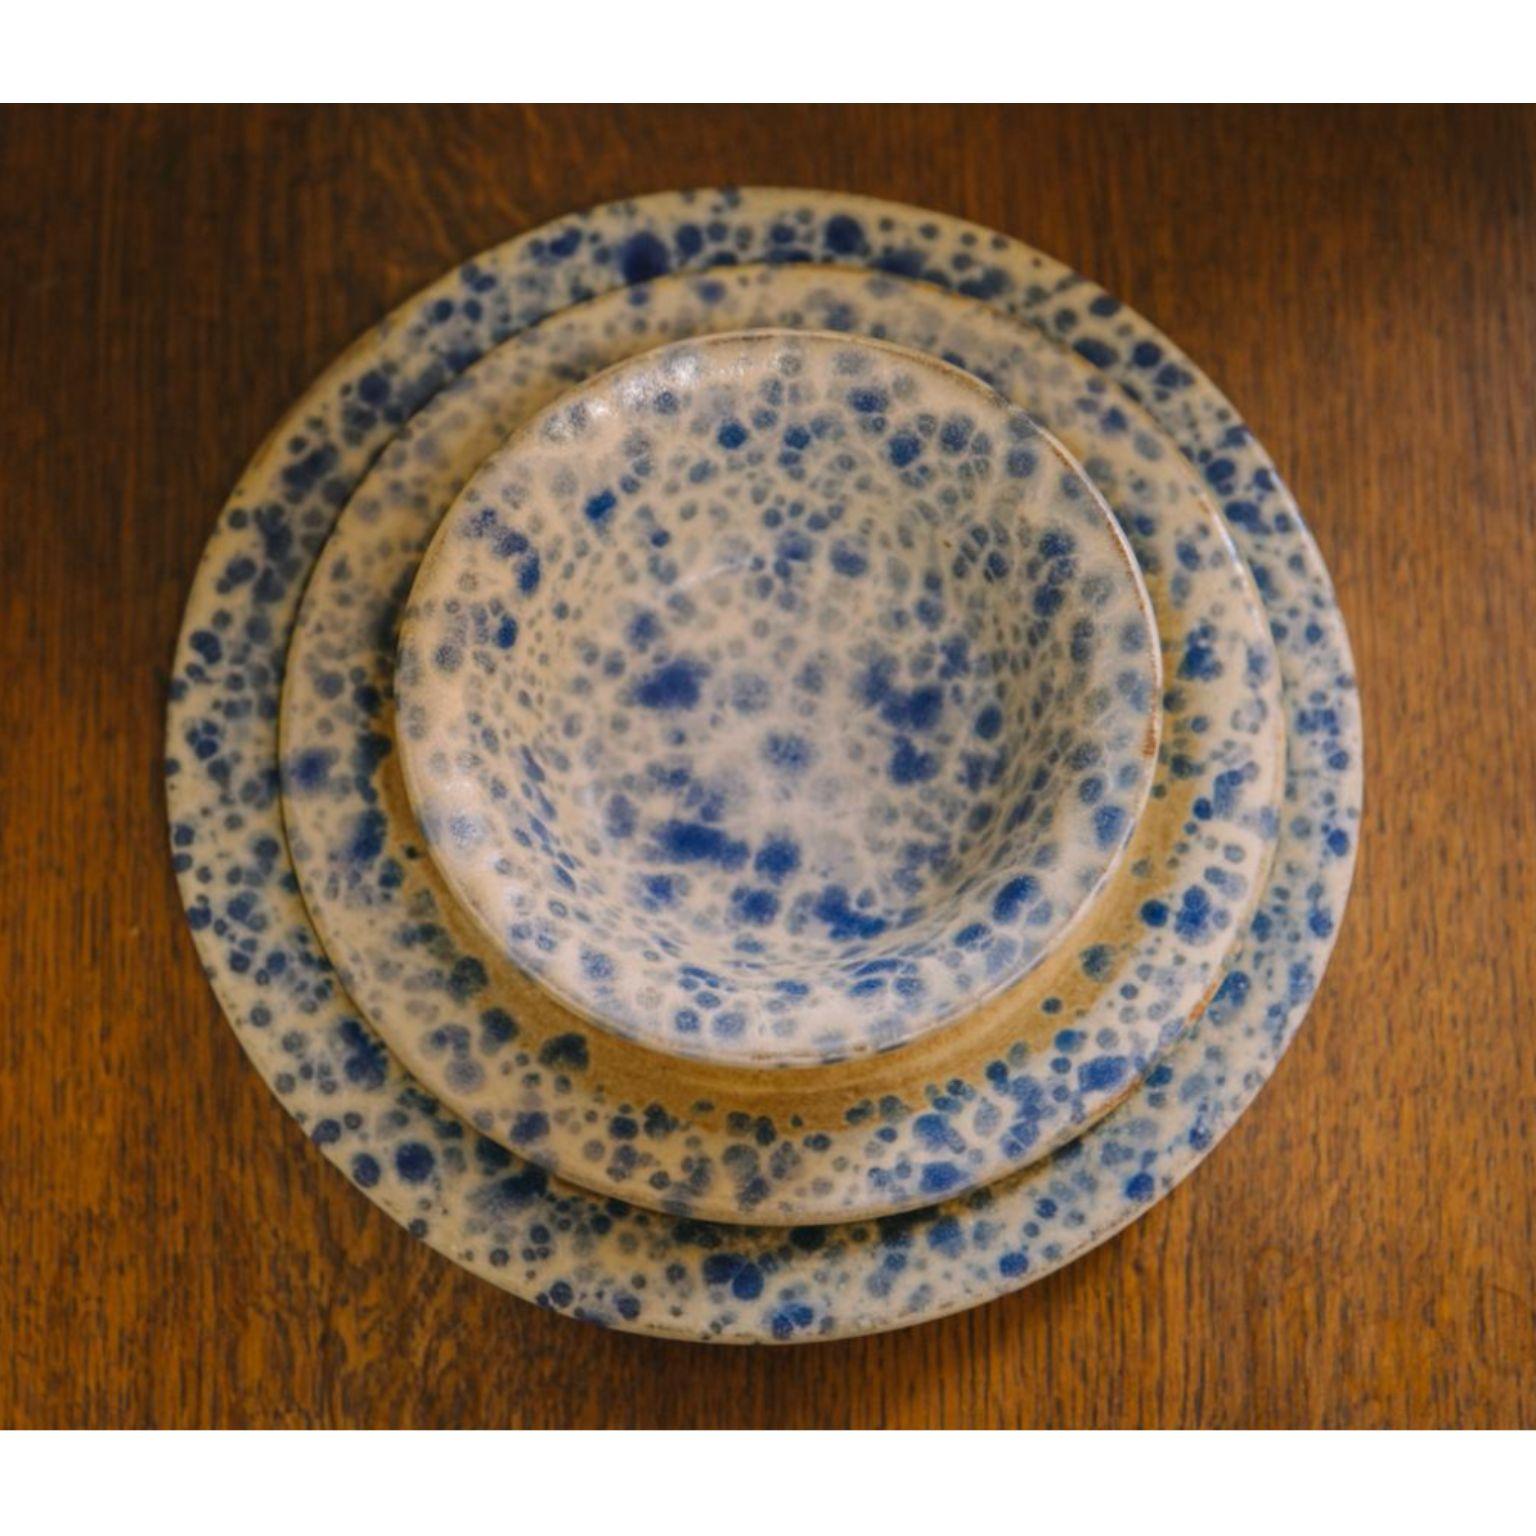 Set of 12 Plates by Casa Alfarera
Dimensions:
Dinner plates 25 cm in diameter
Salad/dessert plates 20 cm in diameter
Bowls 15 in diameter
Materials: stoneware

Hand-thrown Dominican stoneware body fired to 1250 degrees celsius over an oxidation